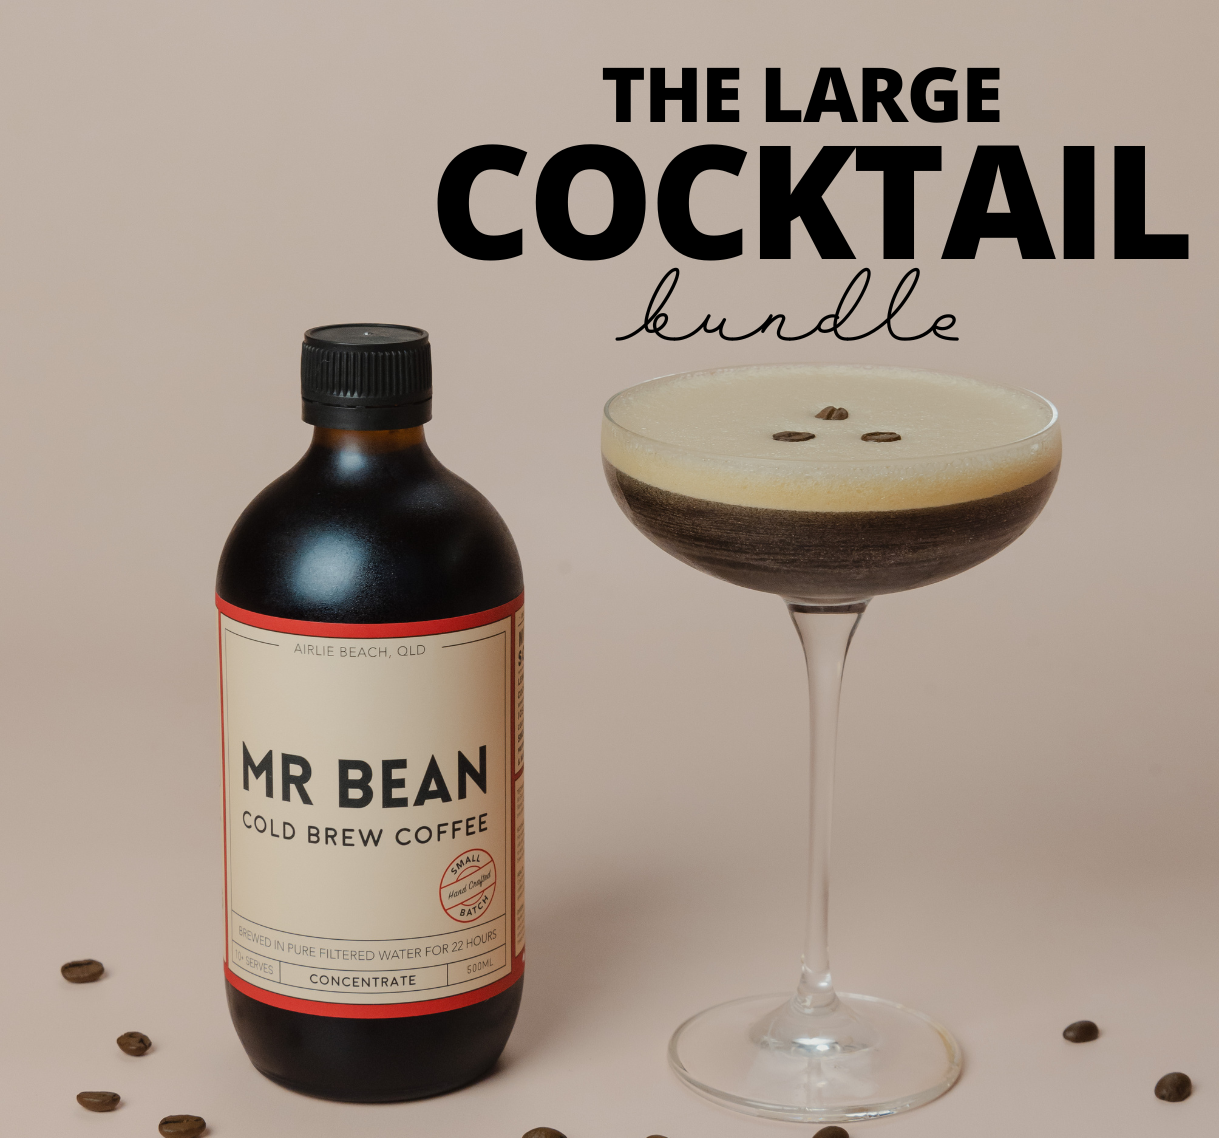 The Cocktail Bundle (large) - Mr Bean Cold Brew Coffee